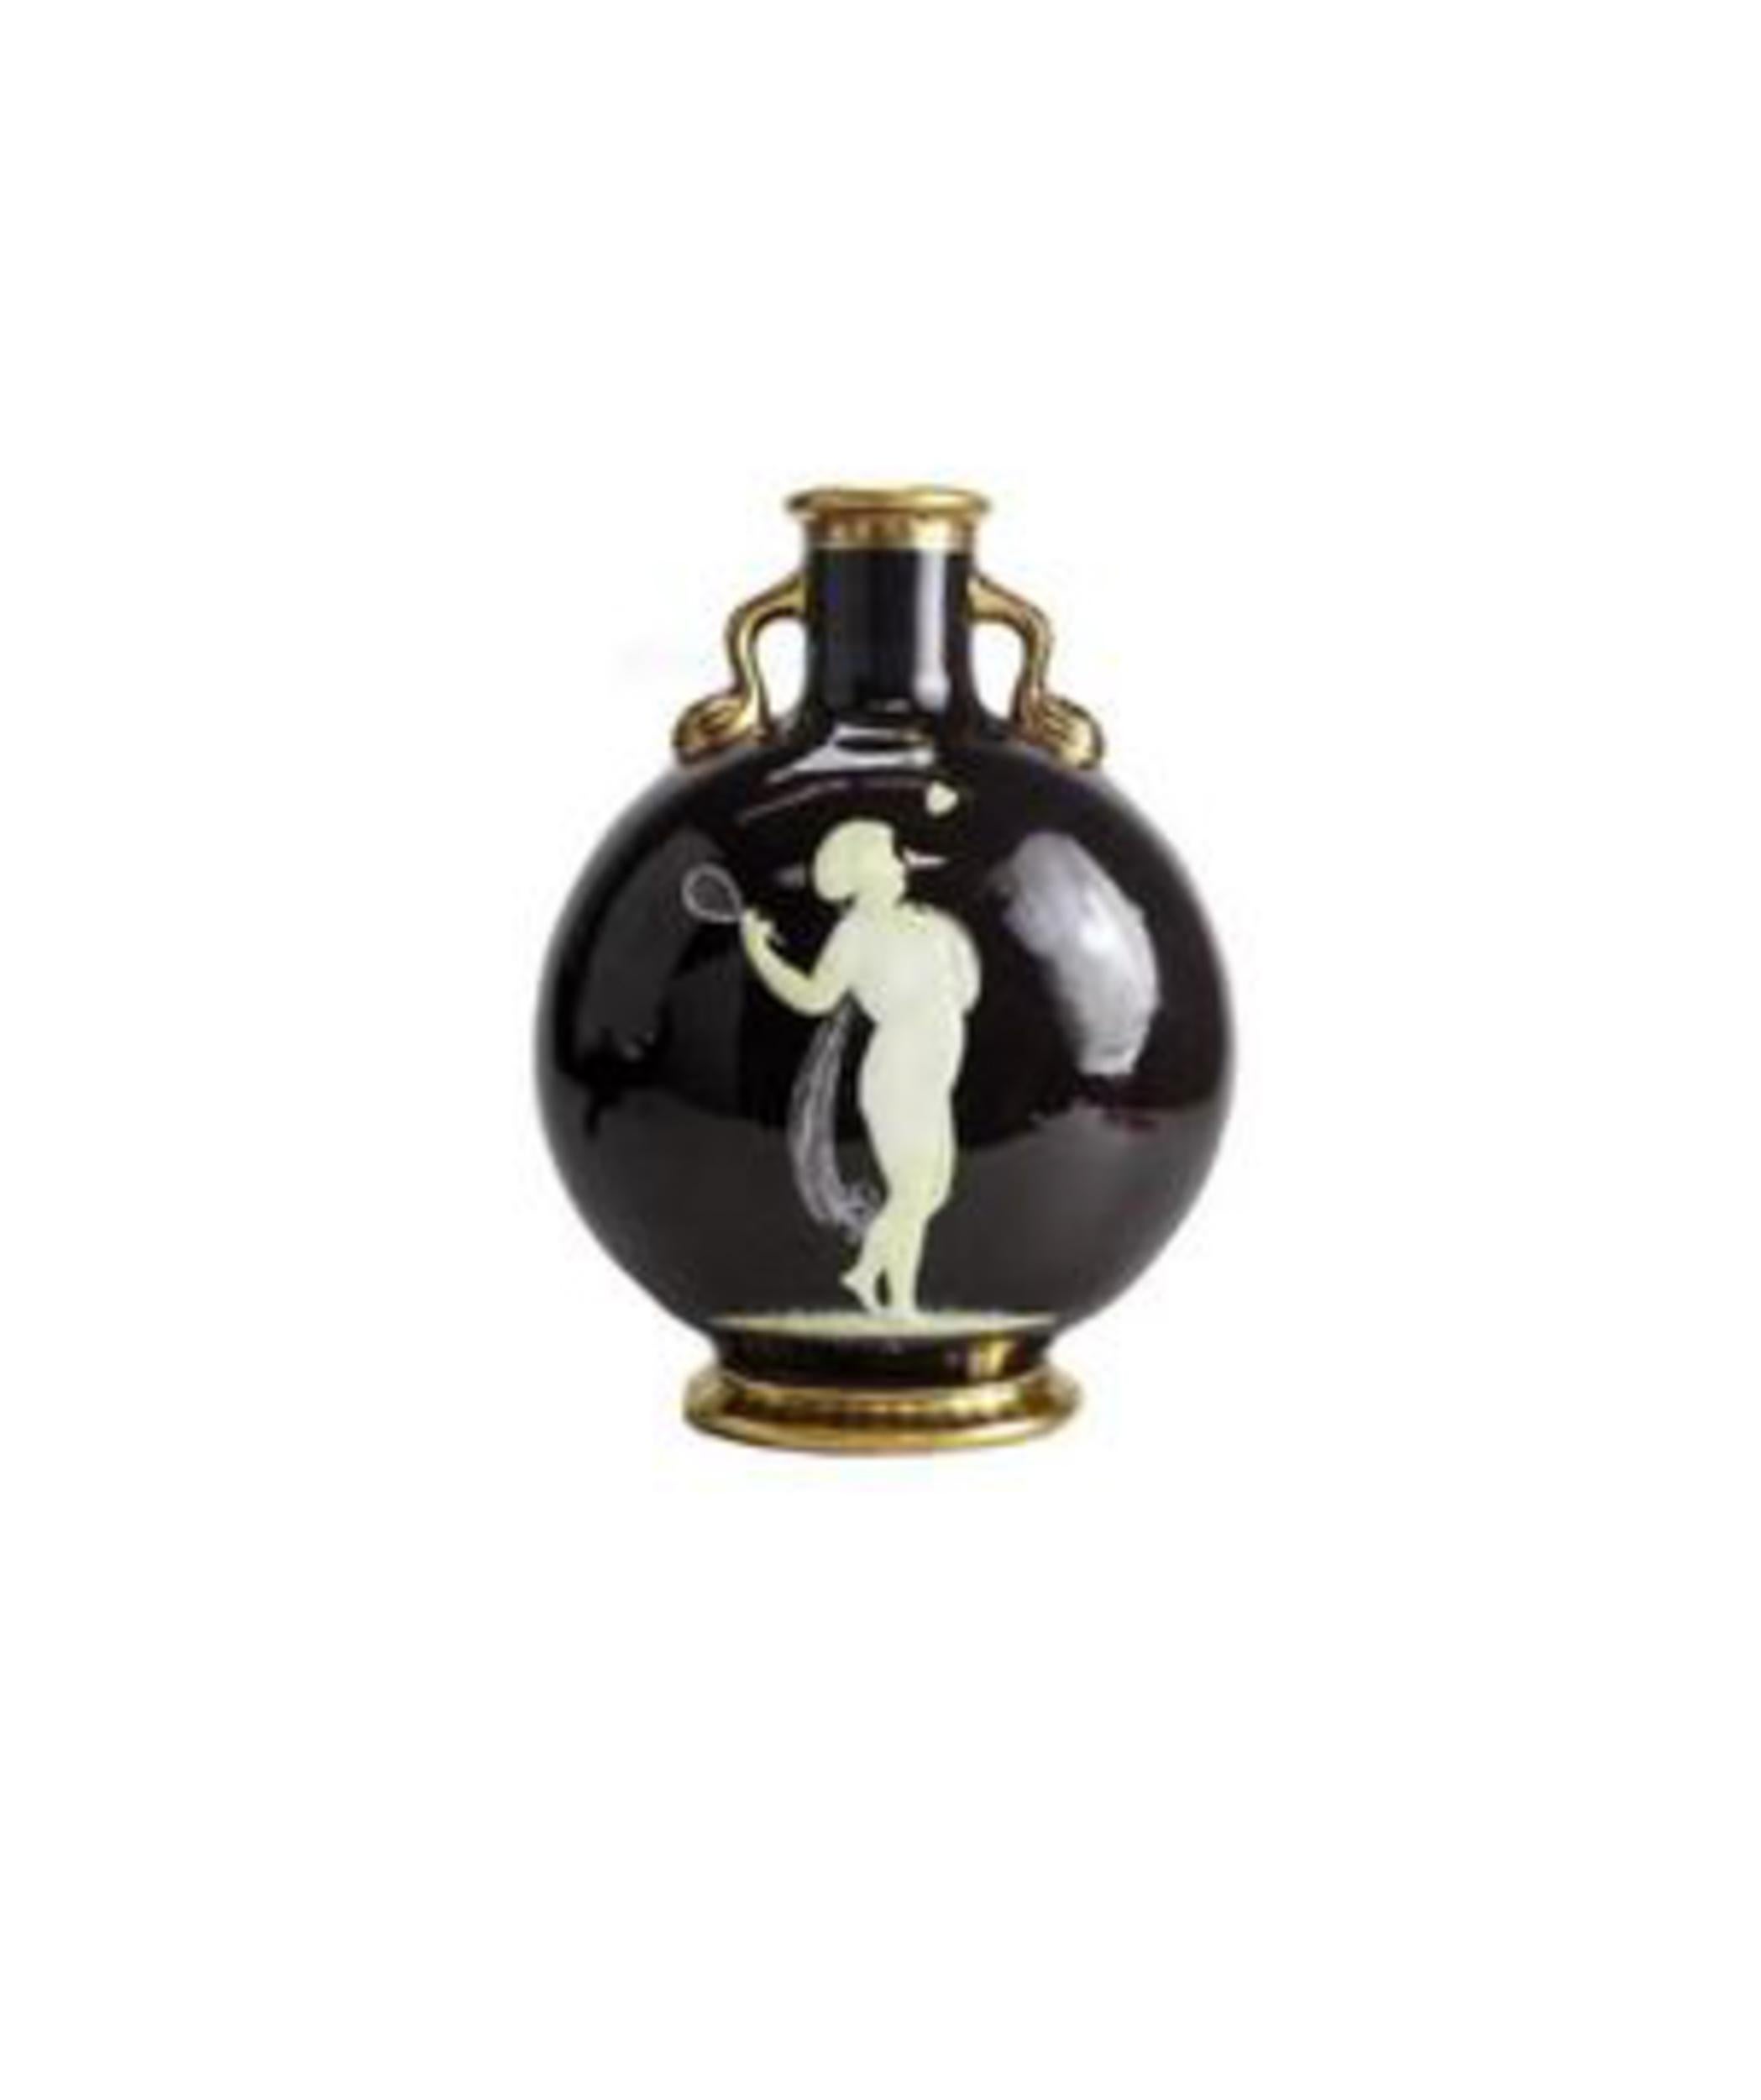 Moore Bros Pate Sur Pate Porcelain Moon Flask Henry, Tennis Player, 19th Century For Sale 1